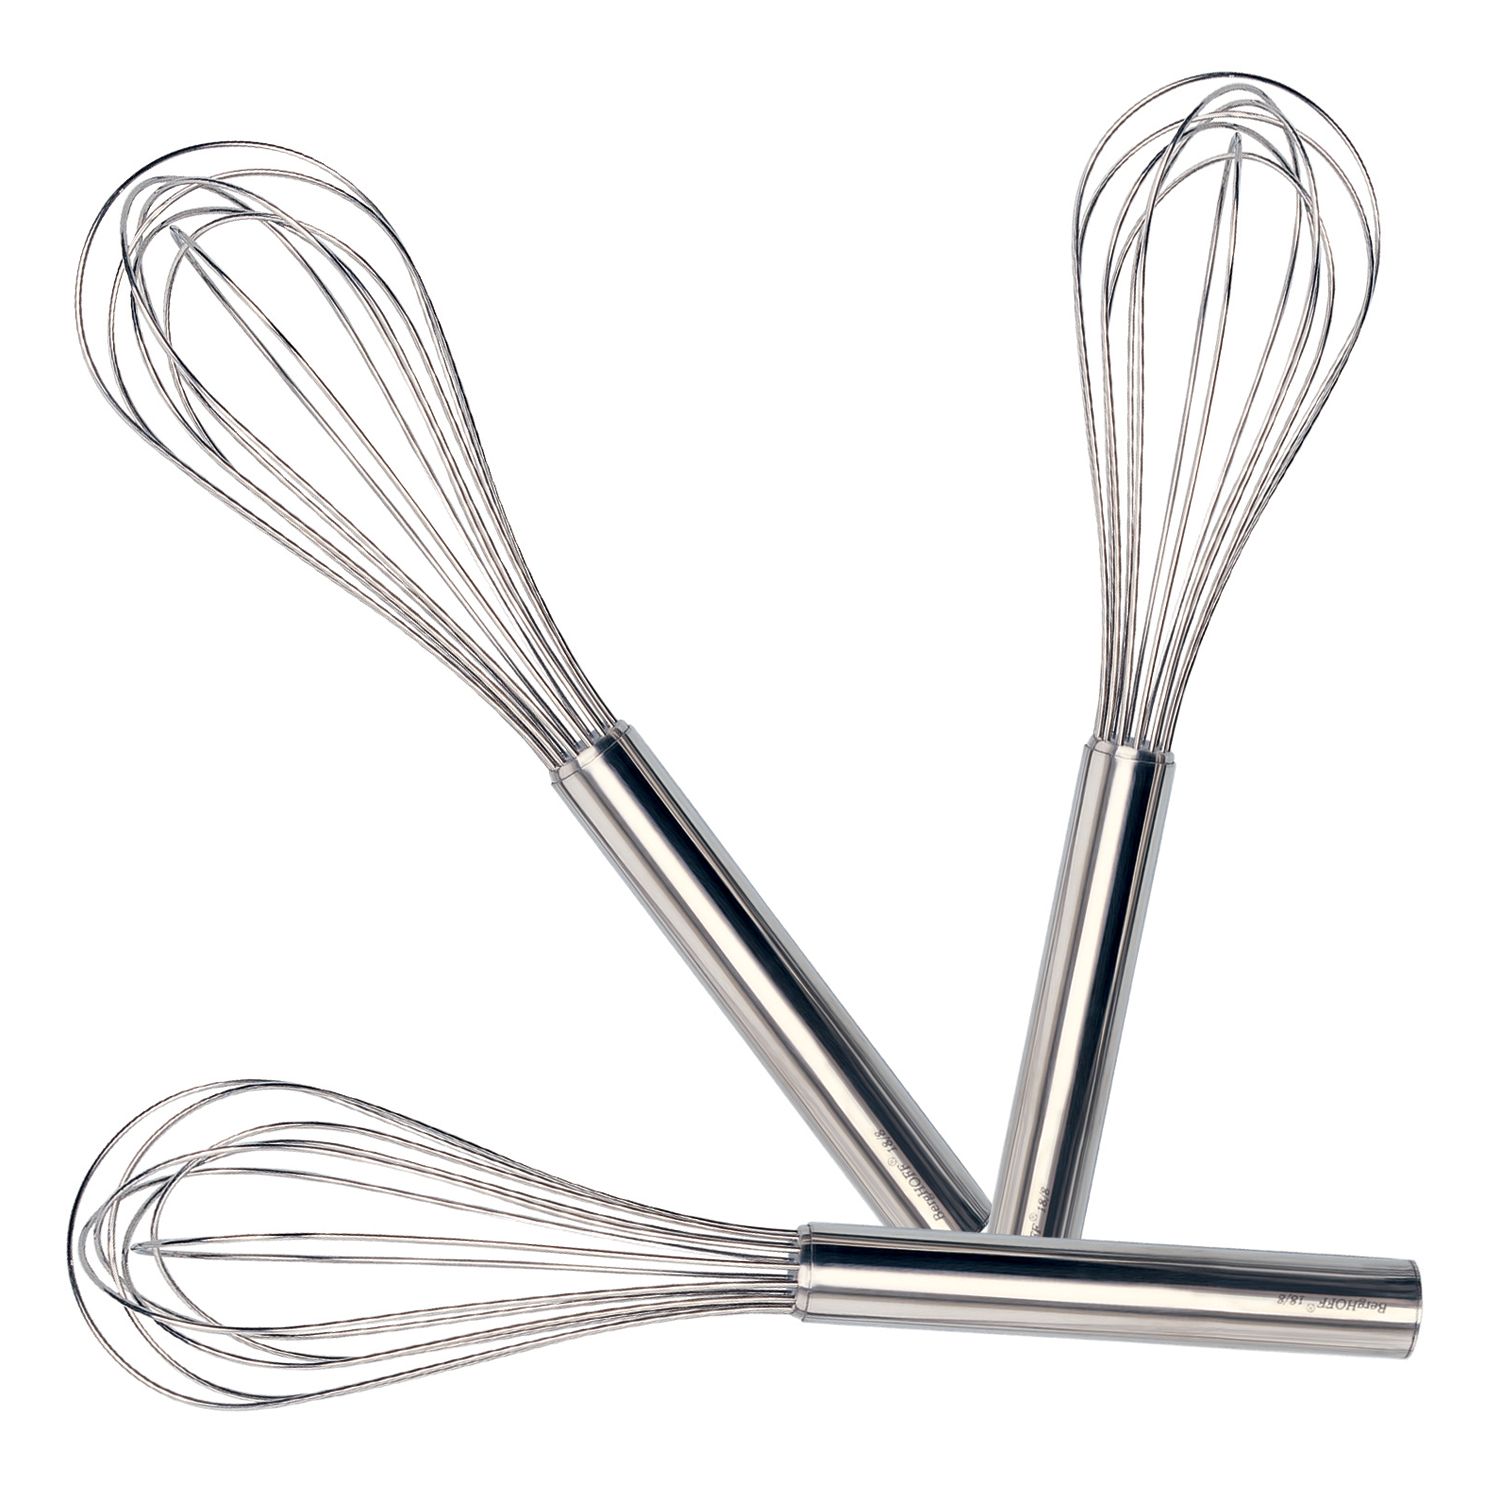 Twister Collapsible Whisk